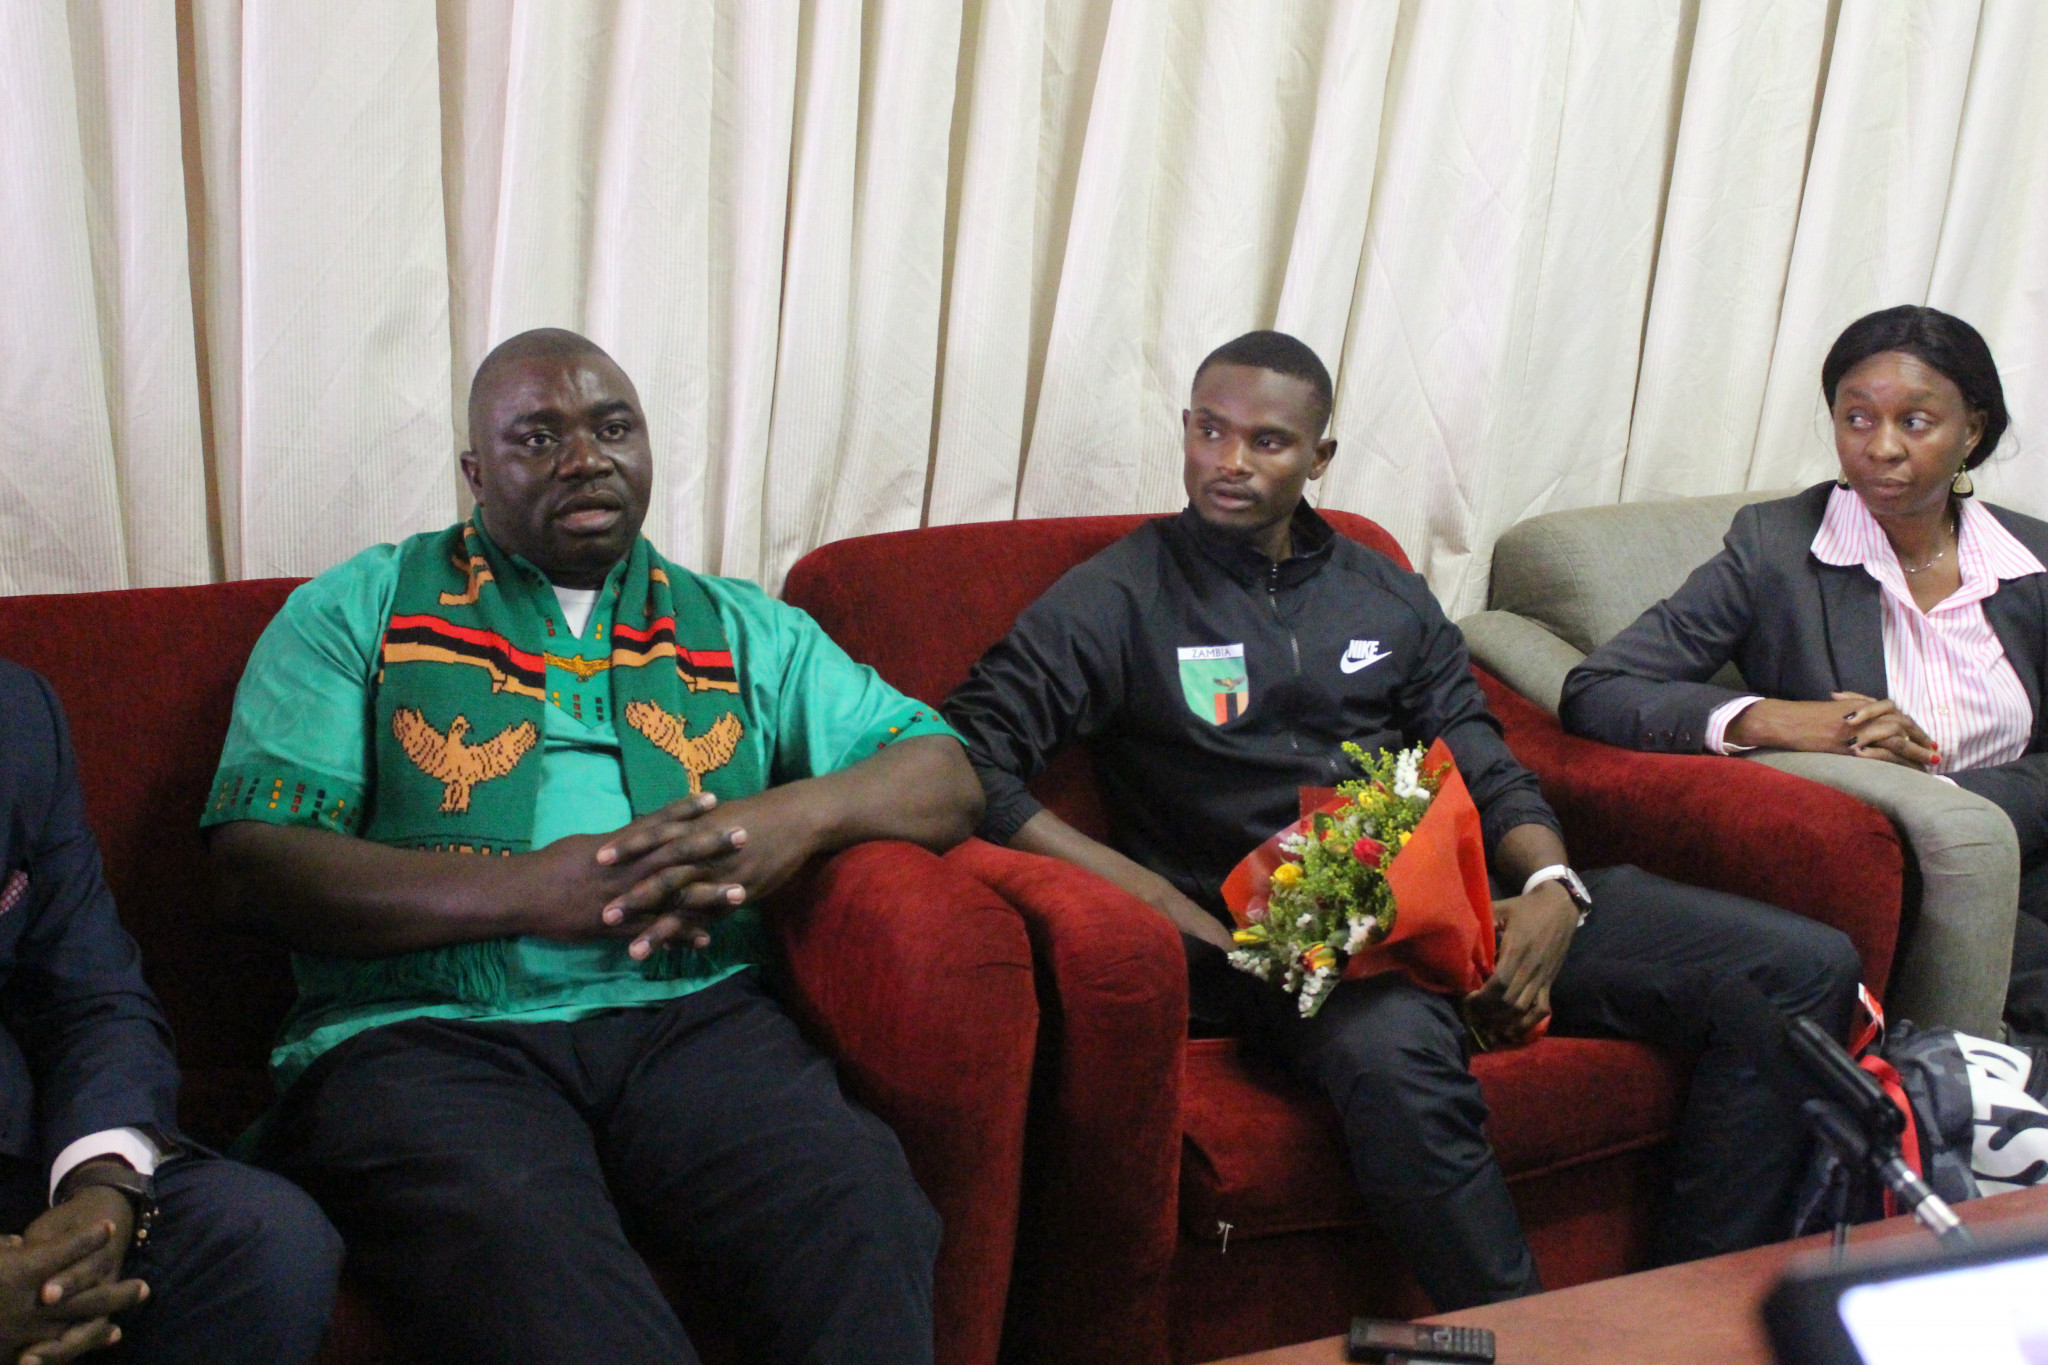 National Olympic Committee of Zambia President praises African Games medallists